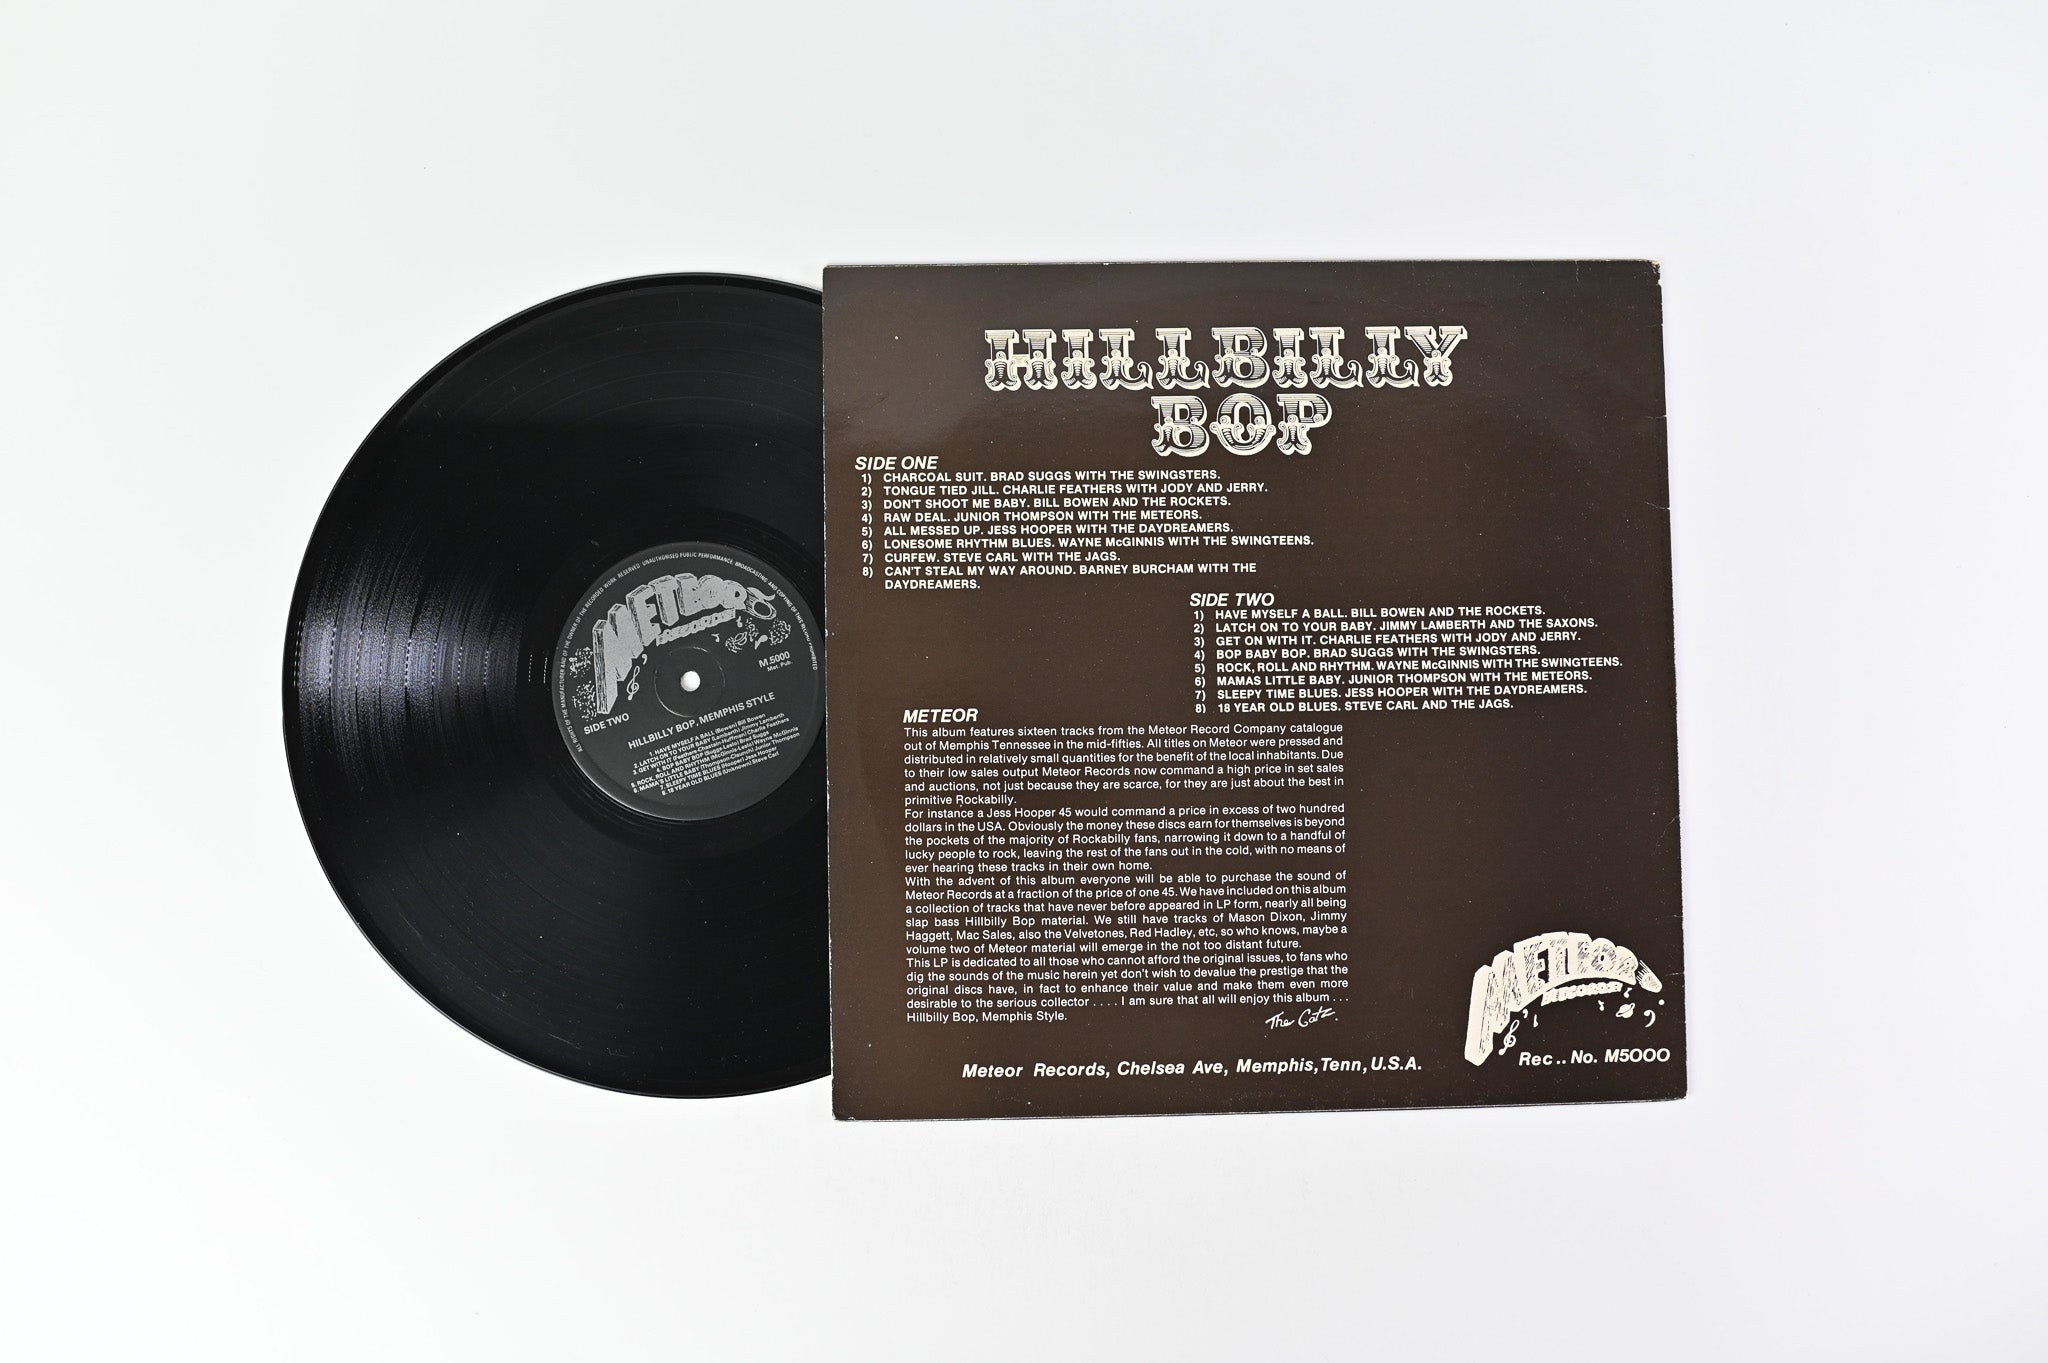 Various - Meteor - Hillbilly Bop, Memphis Style on Meteor Records